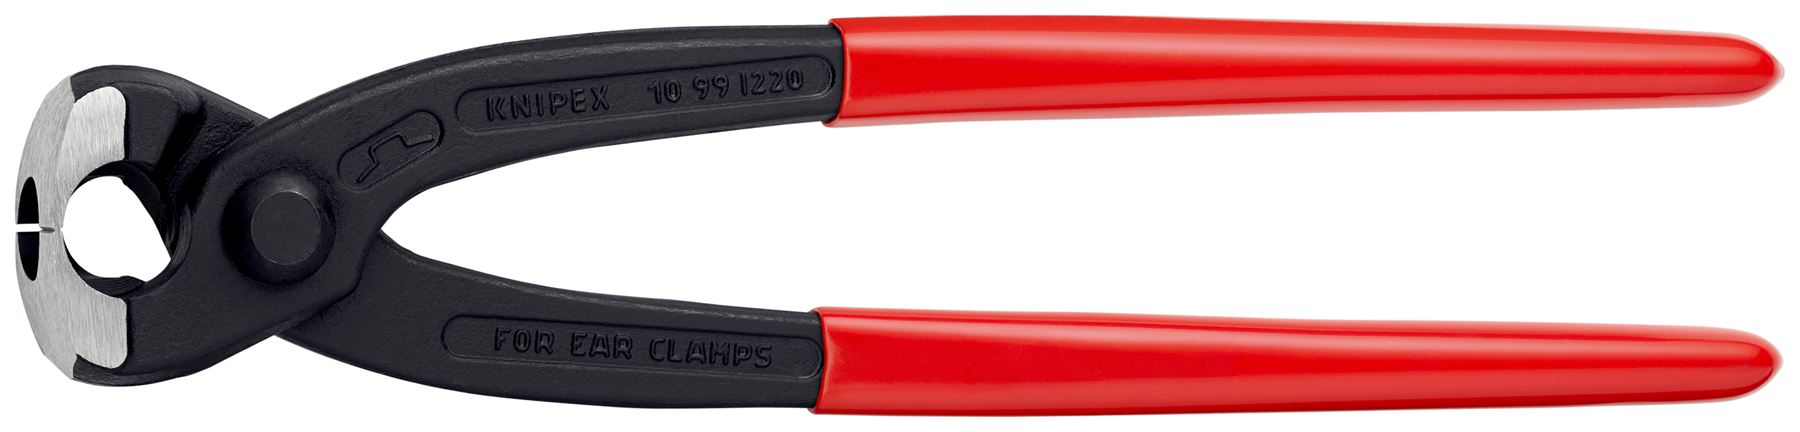 Knipex Ear Type Clip Clamp Pliers 220mm 1 Ear and 2 Ear Clamps 10 99 I220